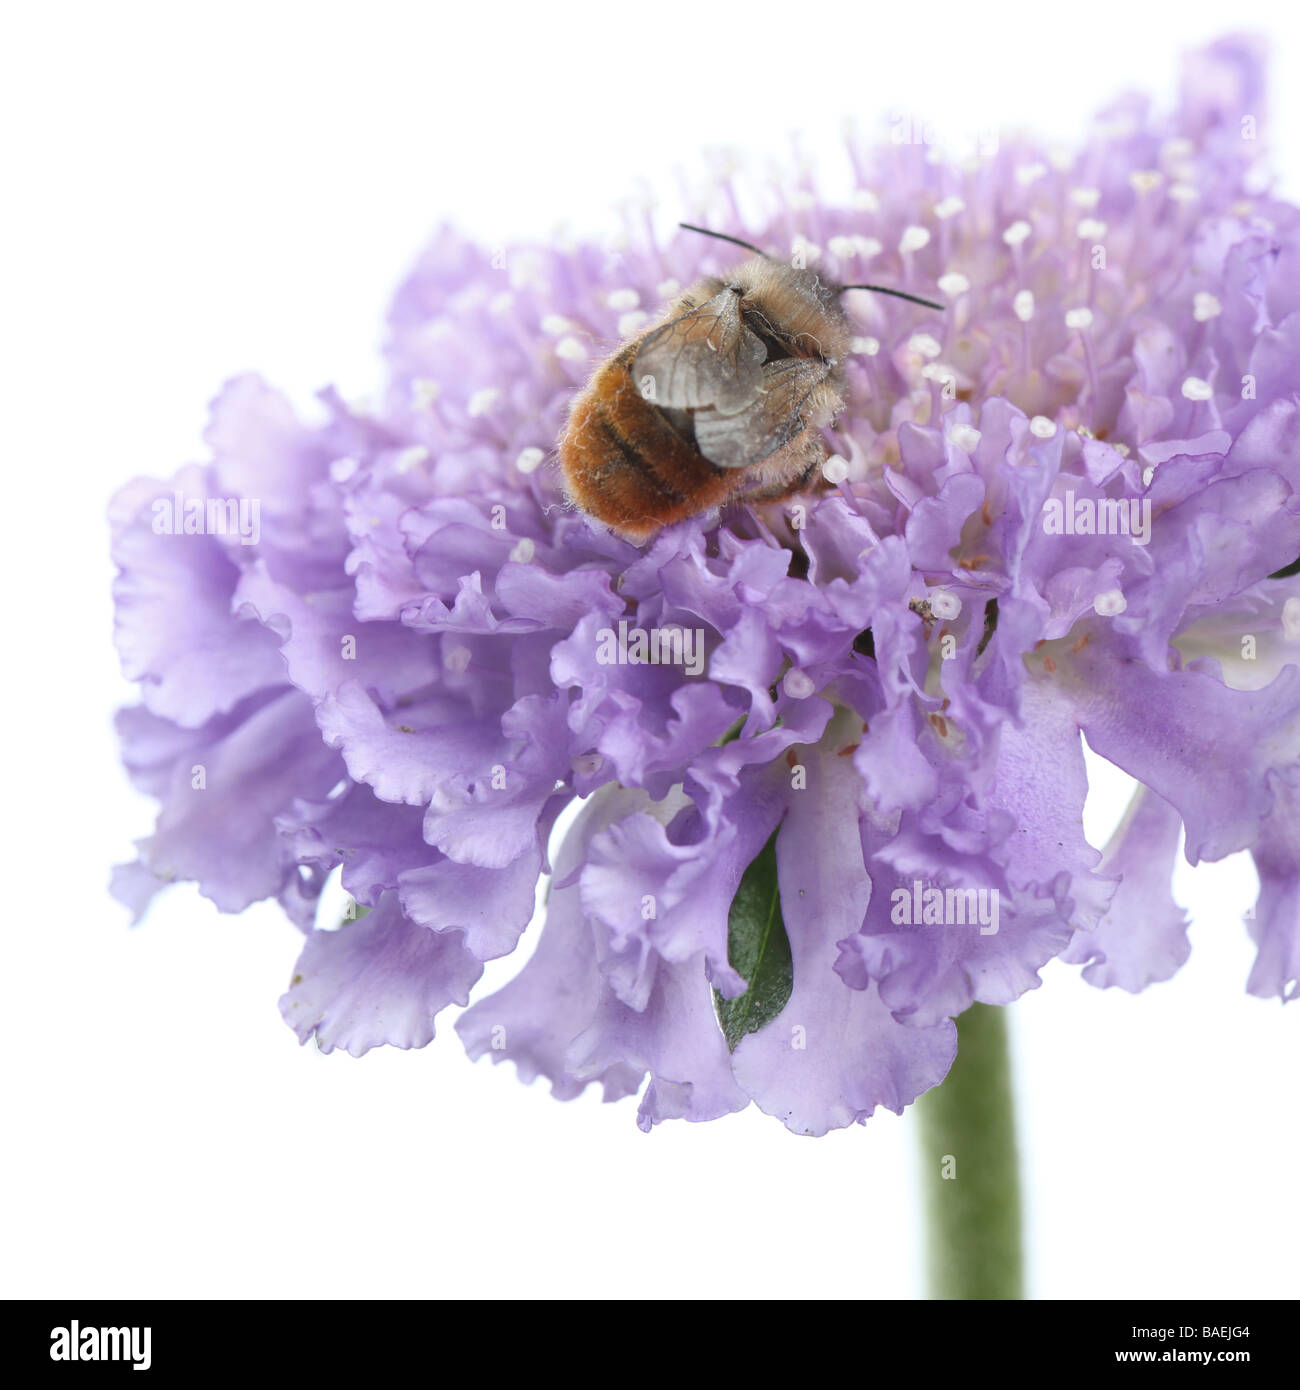 Pin Cushion Flower Scabious Butterfly Blue Stock Photo